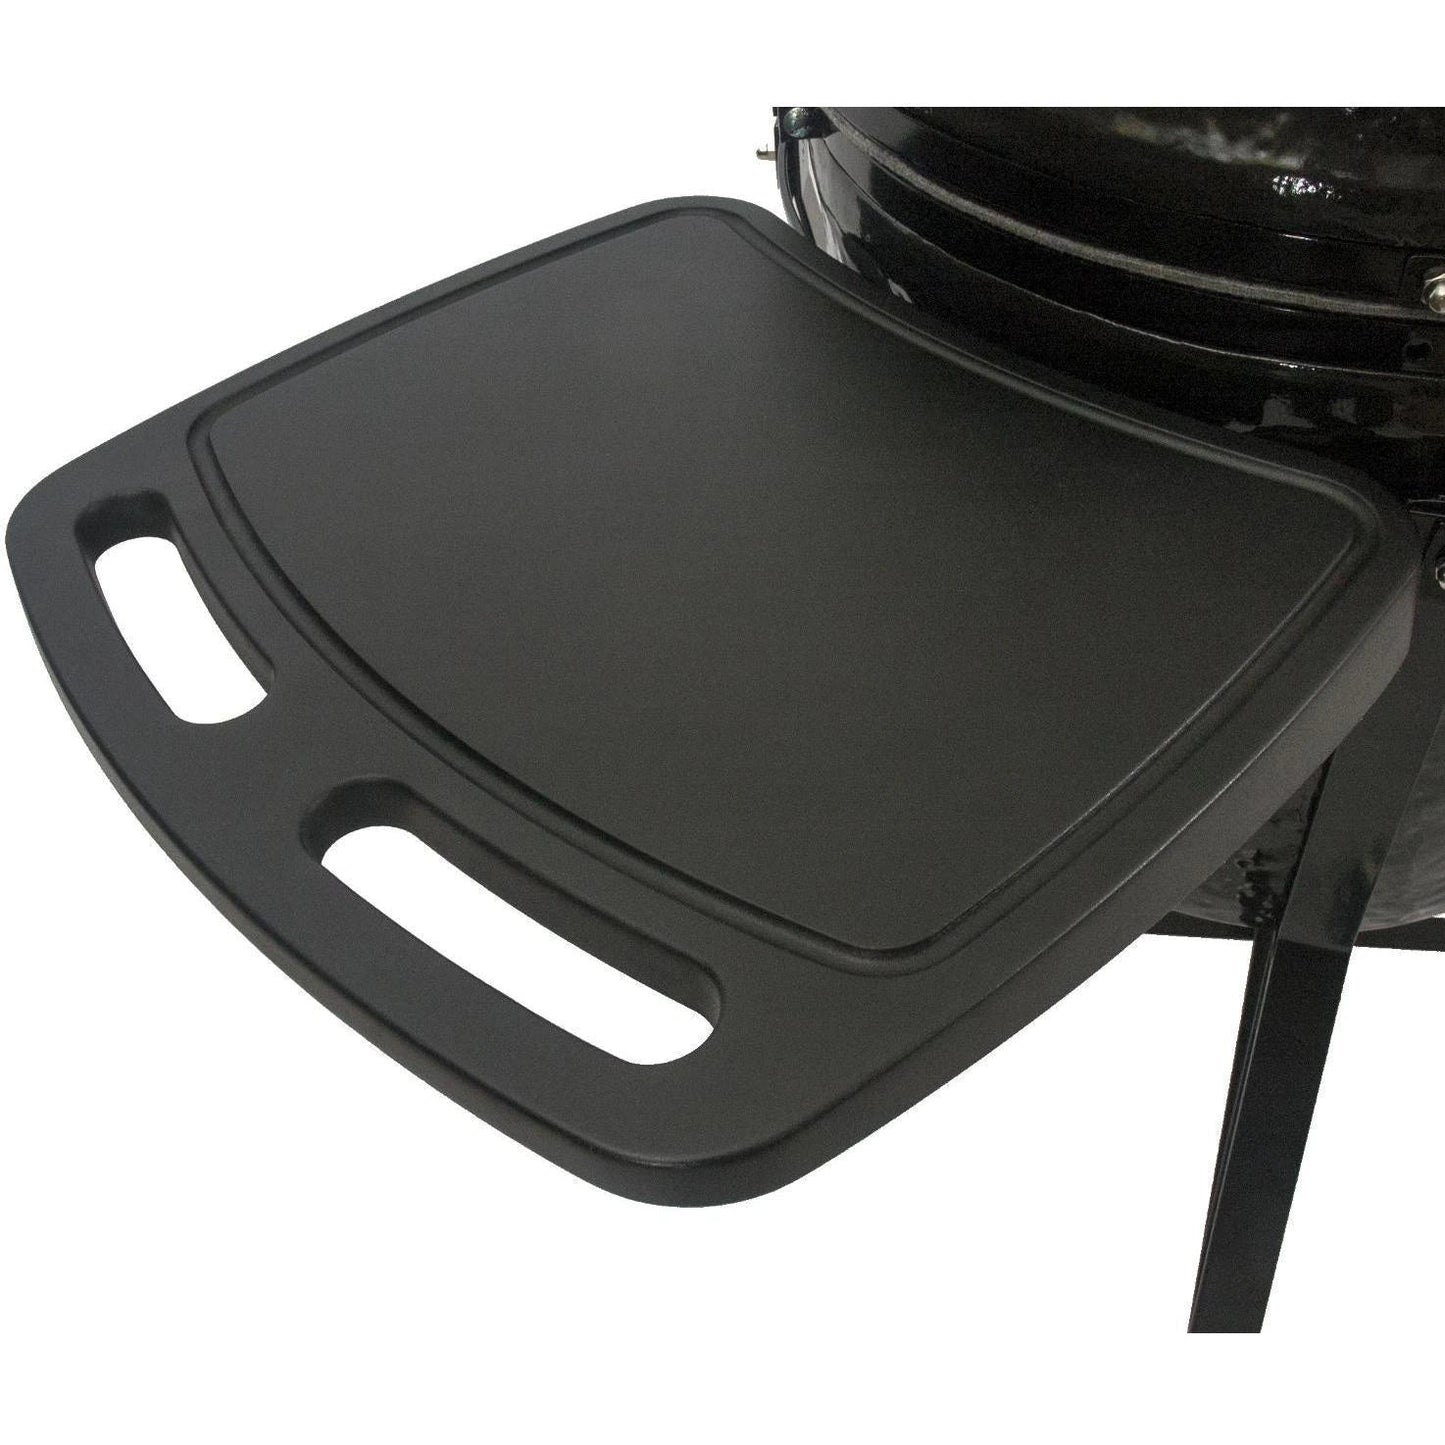 Round All-In-One Grill